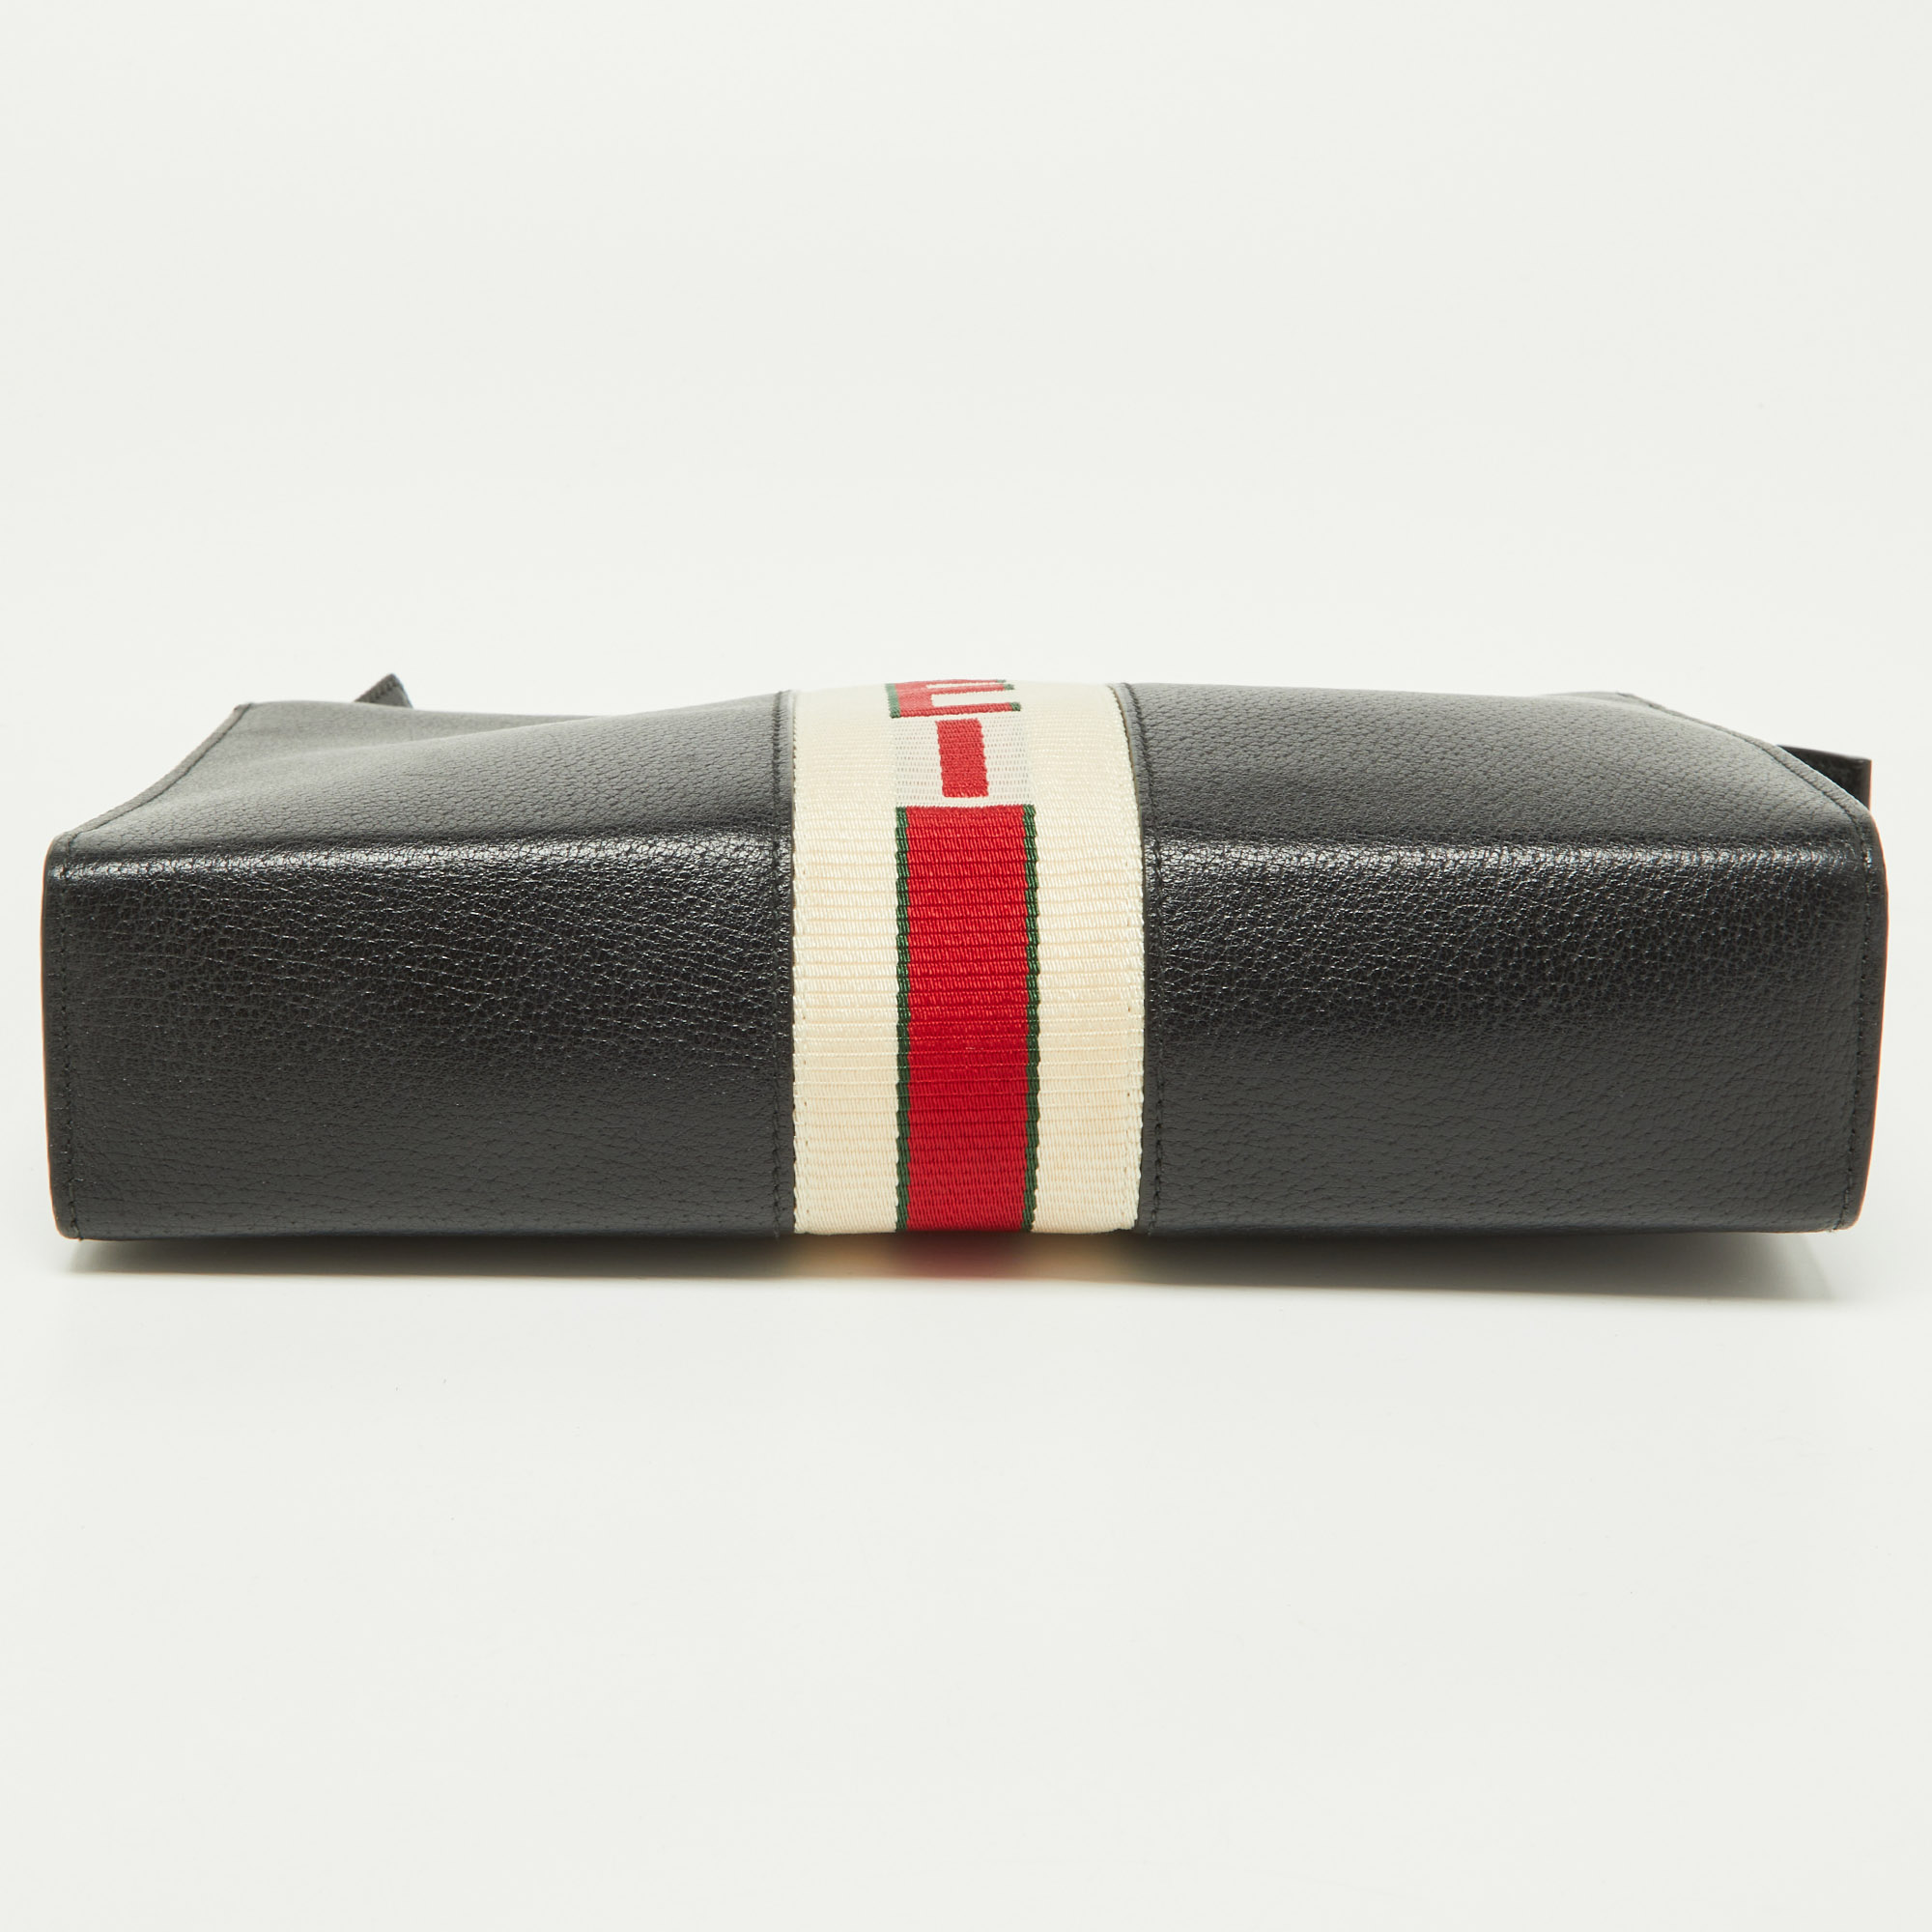 Gucci Black Leather Zip Pouch